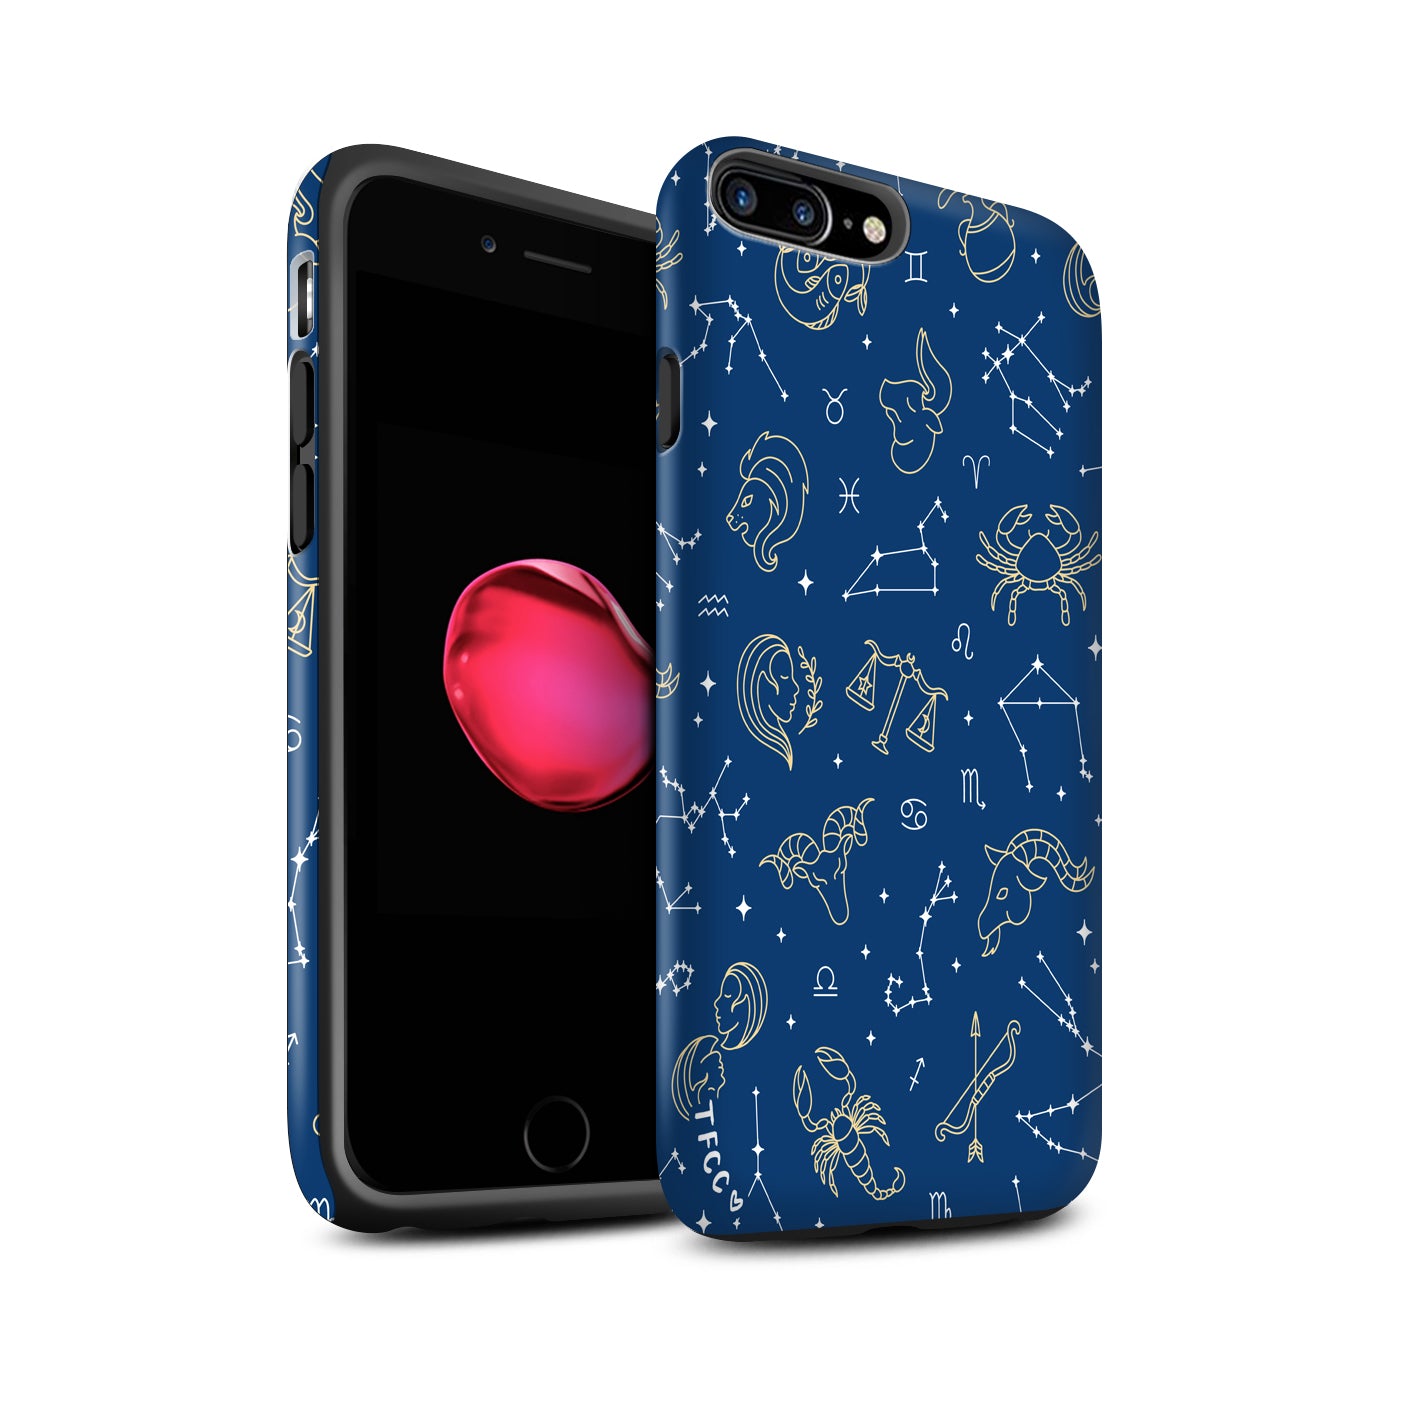 STAR SIGN CASE - thefonecasecompany